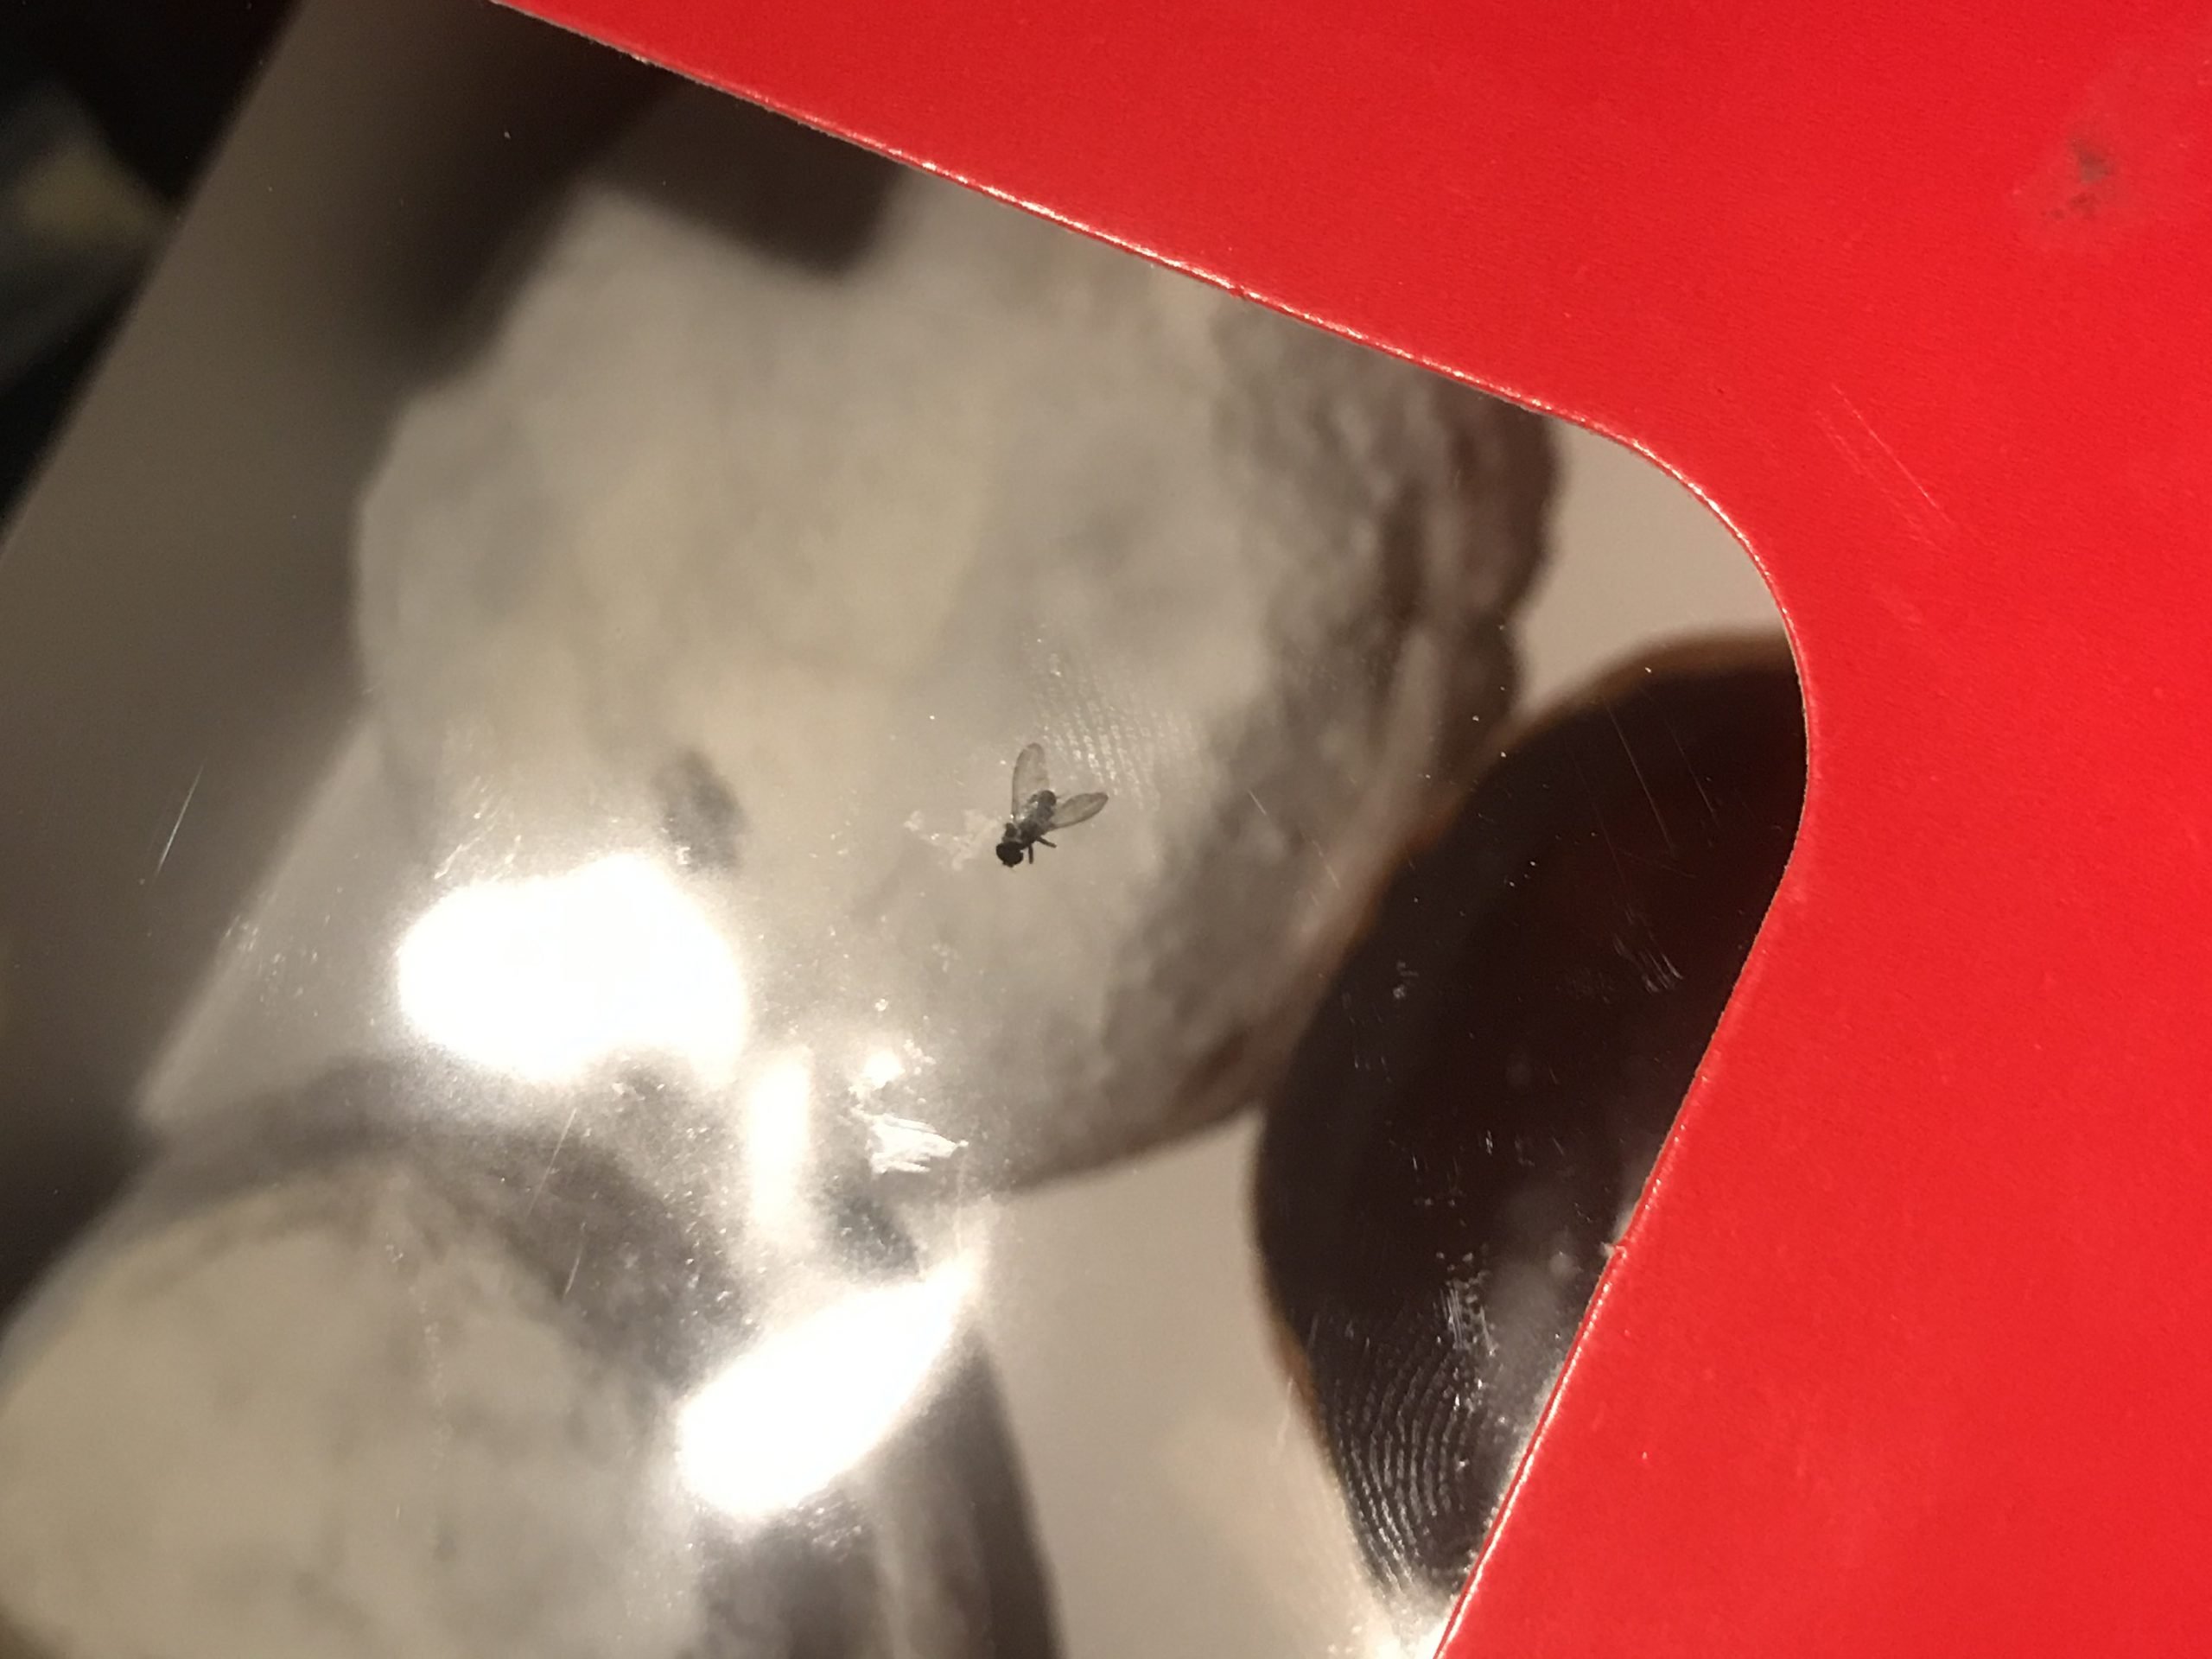 Jewel Osco complaint Insect in my food